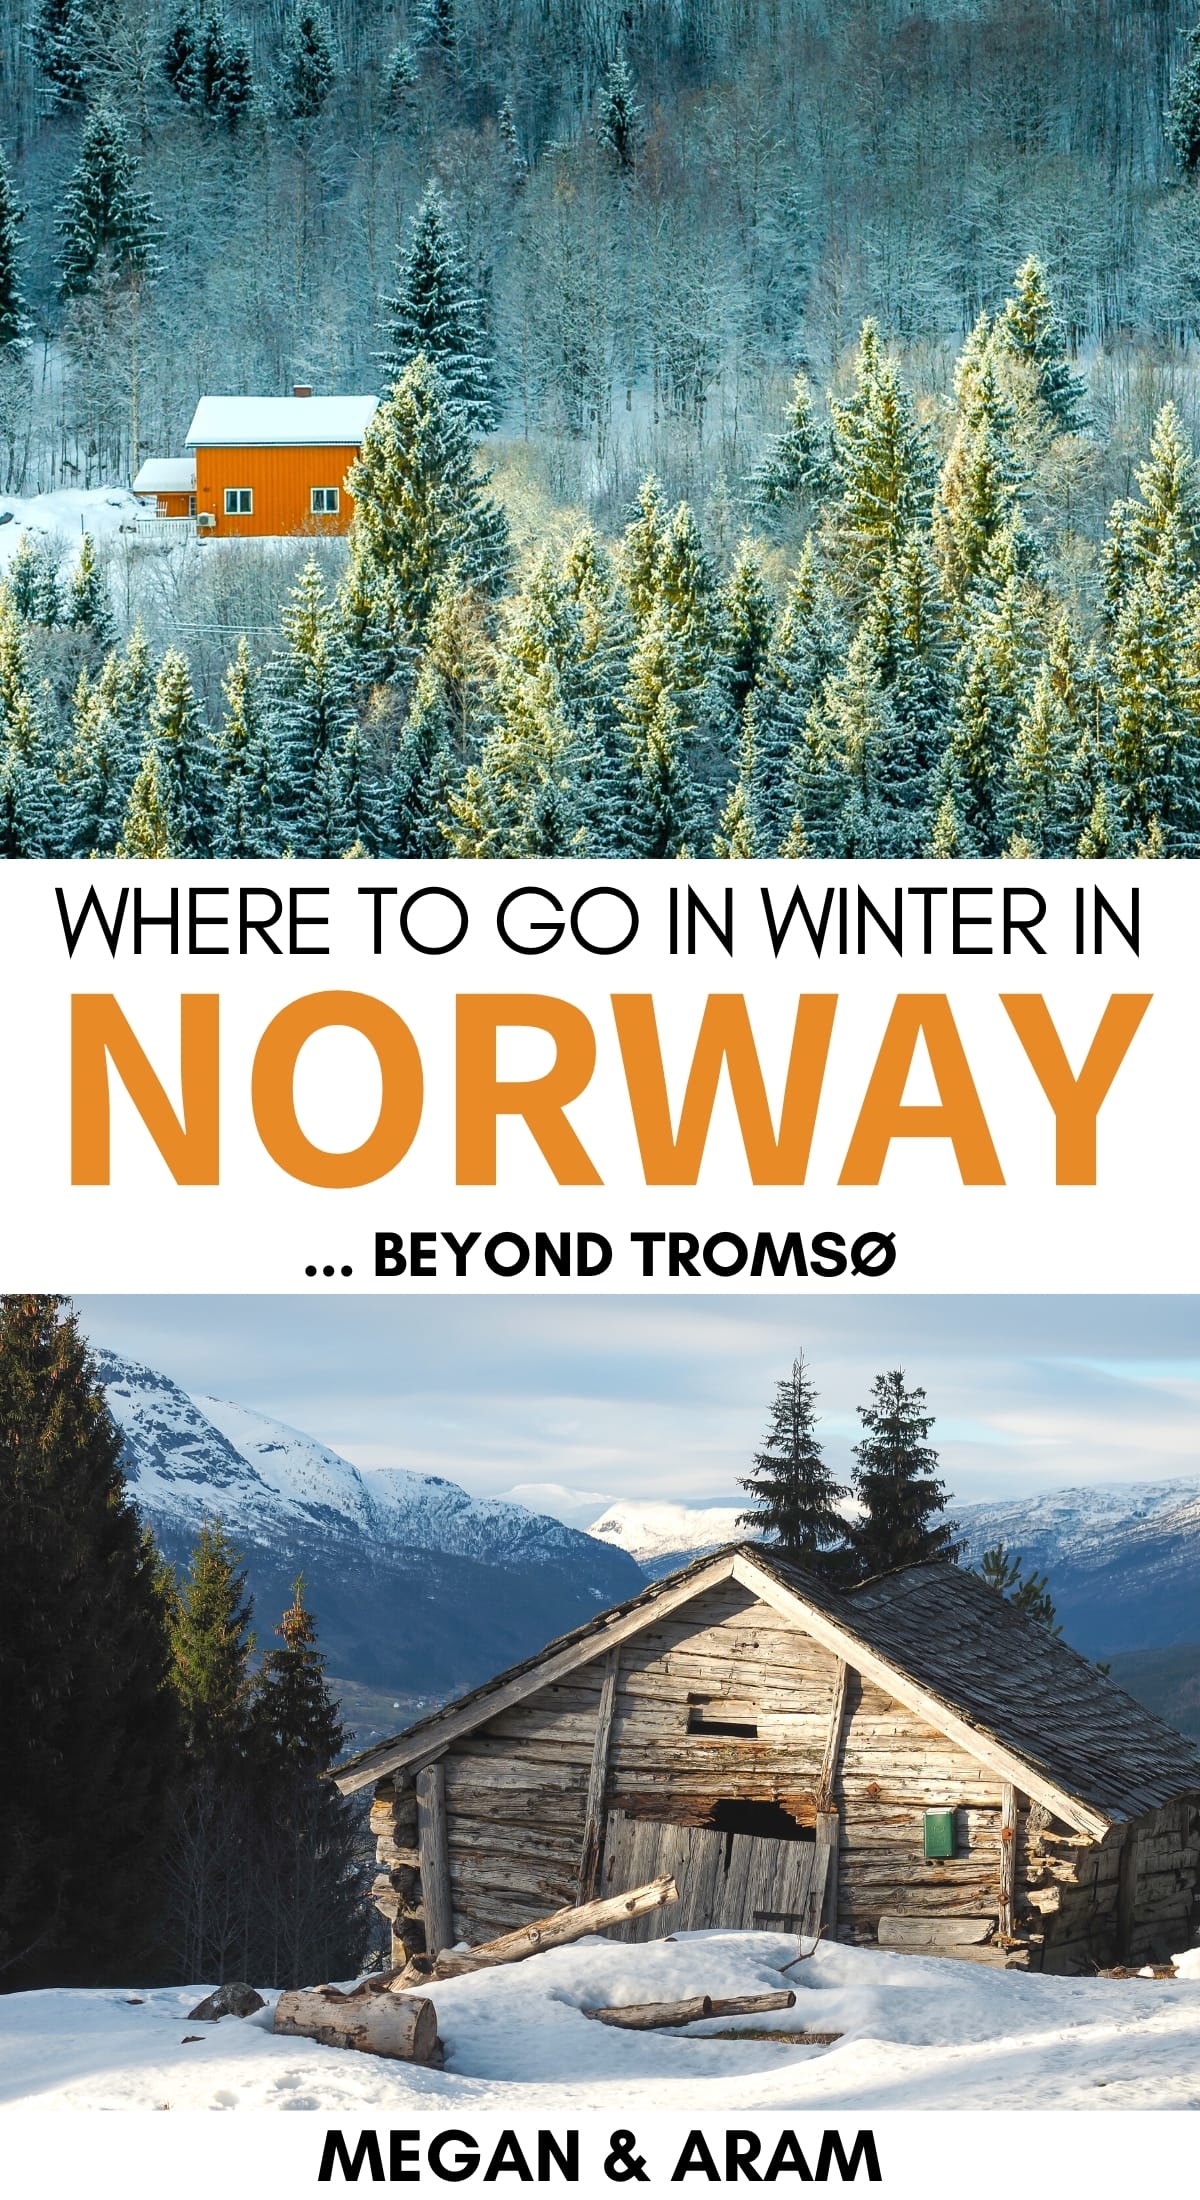 Considering a trip to Norway in winter? This guide will walk you through the best places to visit in Norway in winter and tell you the pros and cons of each. Tromso excluded! | Places to visit in Norway | Norway in winter | Norway winter trips | Norway winter destinations | Tromso | Lofoten Islands | Bergen | Oslo | Northern lights in Norway | Where to see the northern lights in Norway | Visit Norway | Winter in Norway | Christmas in Norway | Norway in December | Norway destinations | Norway nature